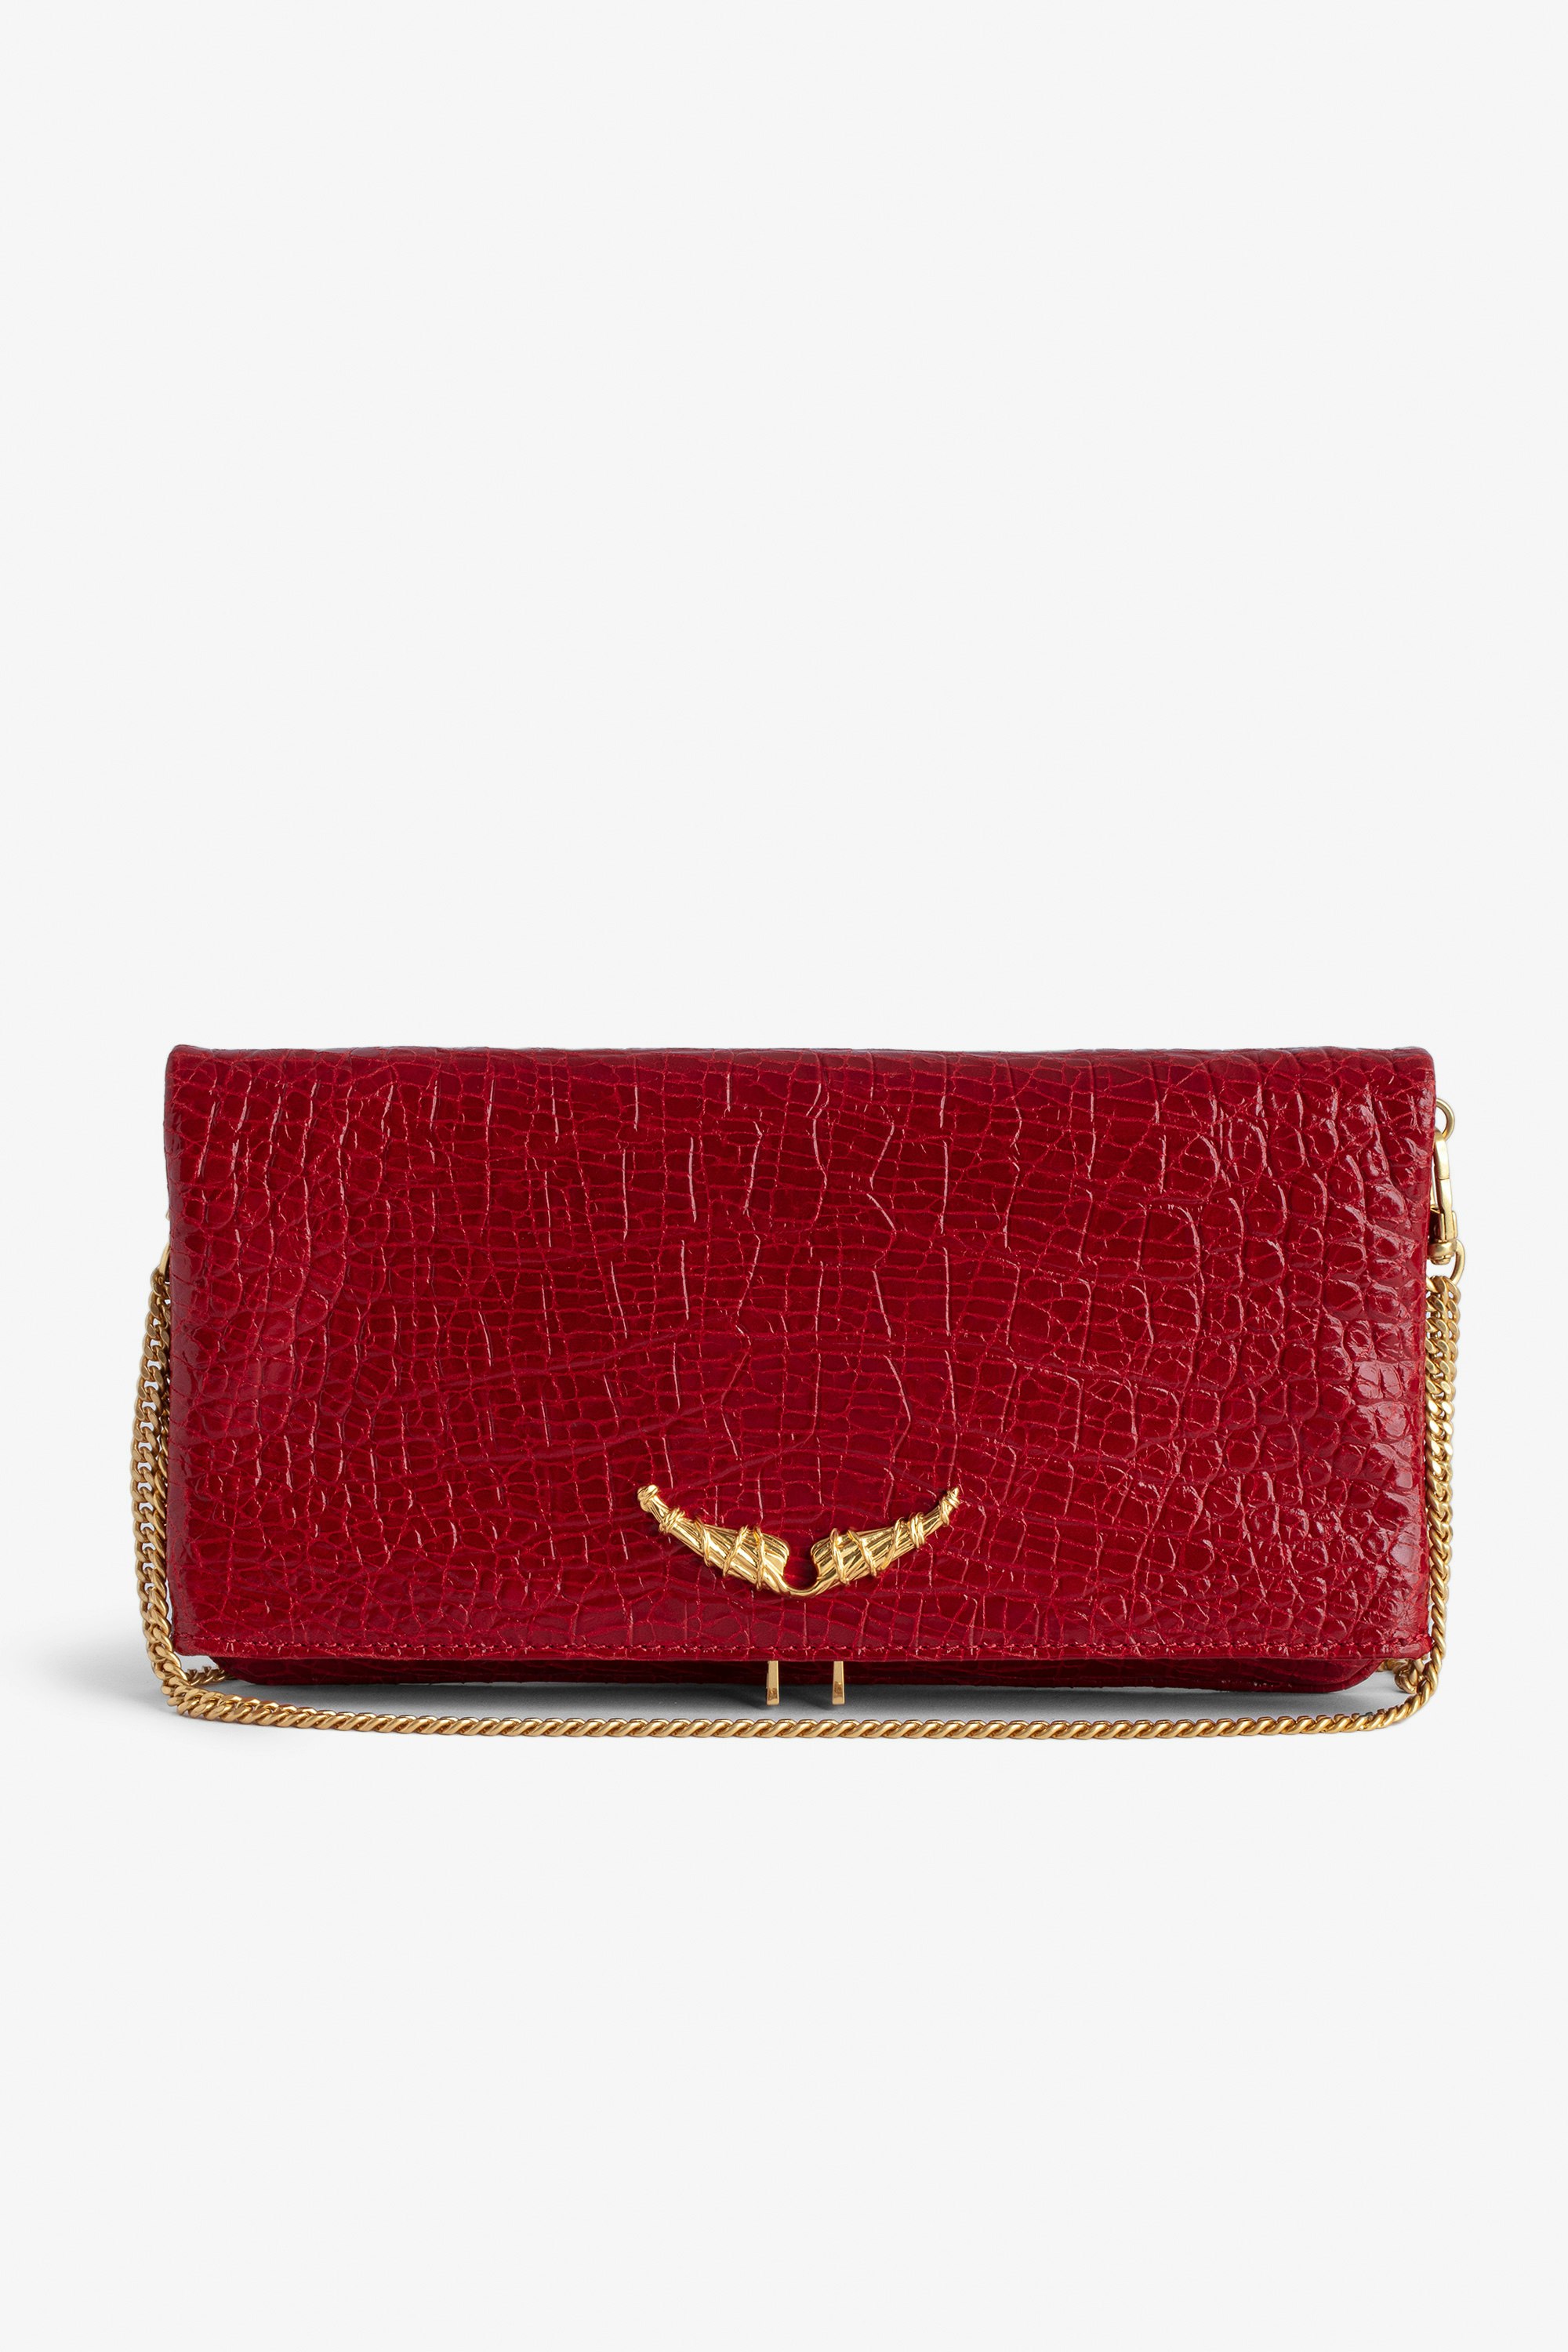 Rock Embossed Clutch - Rock red croc-embossed leather clutch with Goossens gold-tone metal chain.